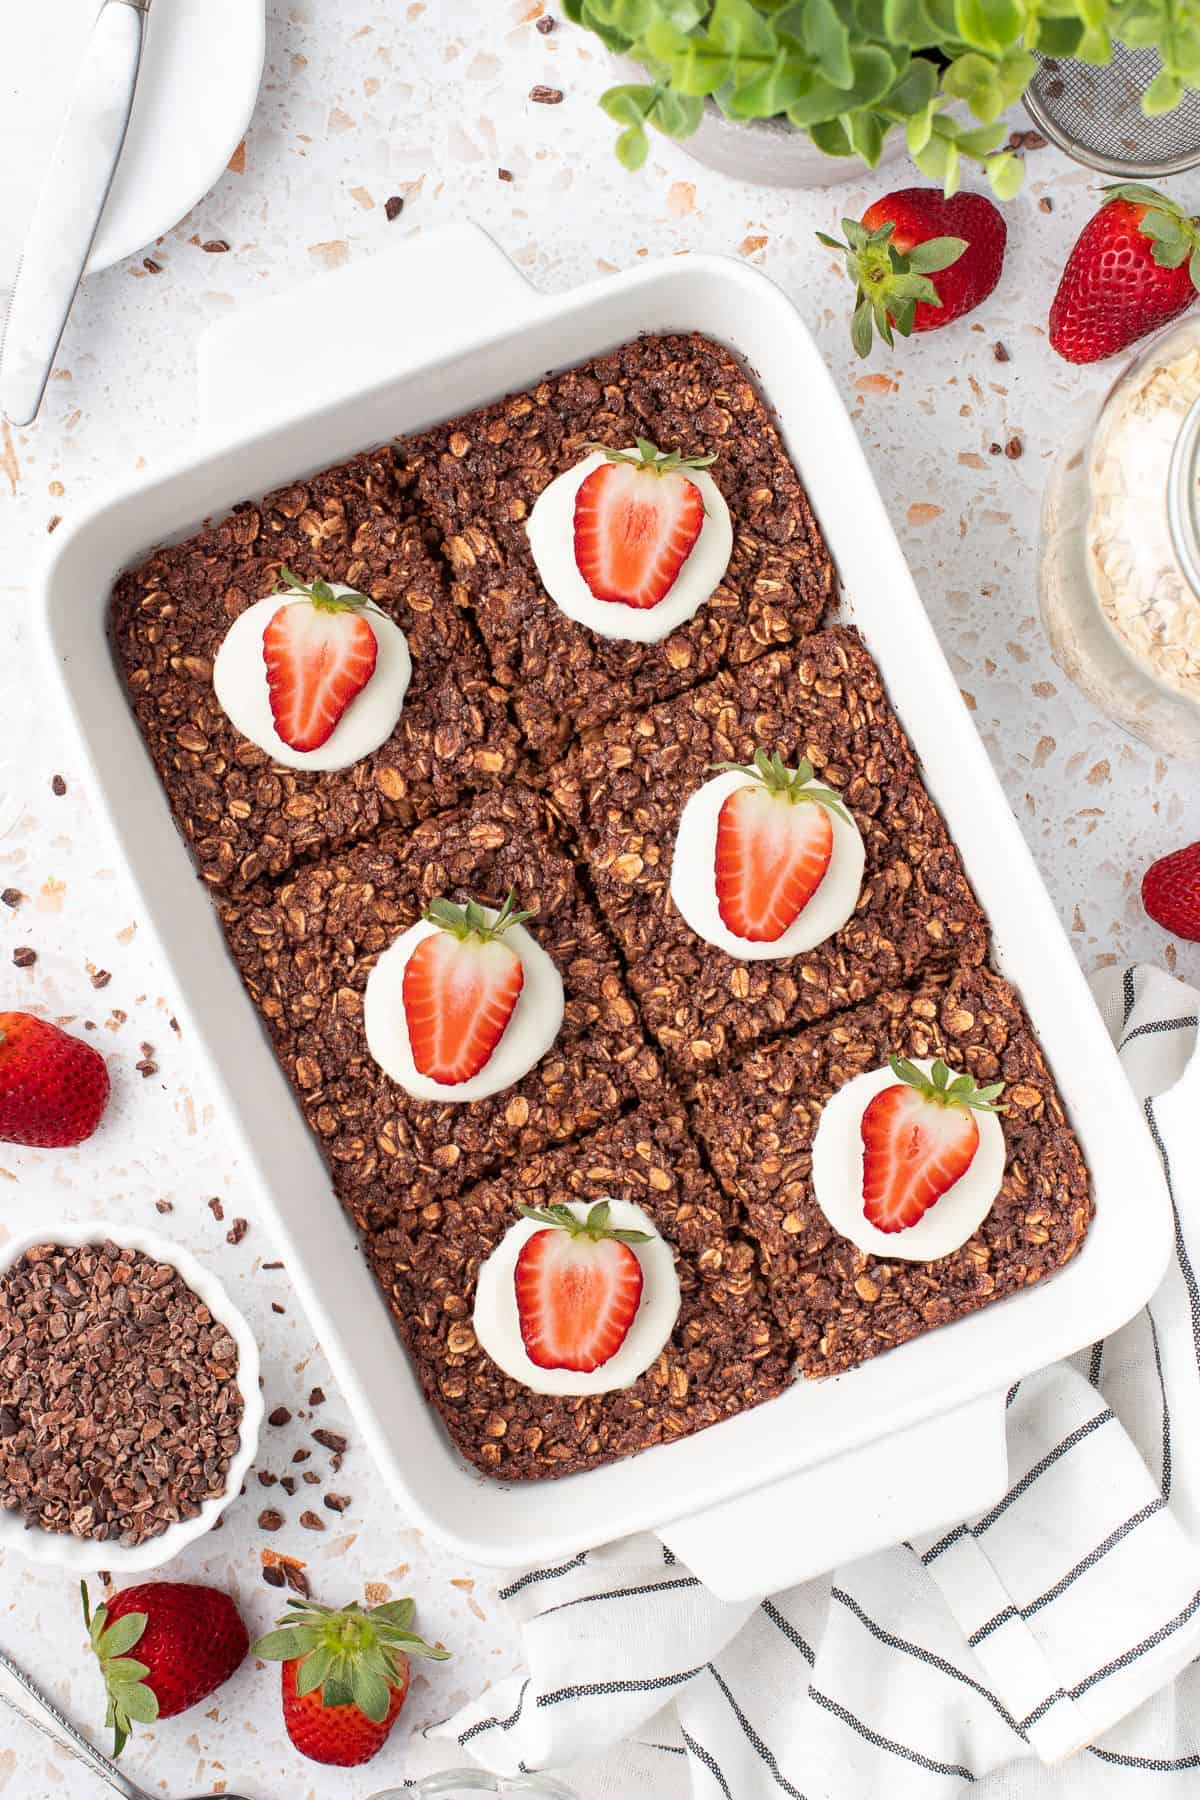 White rectangular dish of baked chocolate oatmeal, cut into six pieces, with a spoon of yoghurt and strawberry half on each piece.